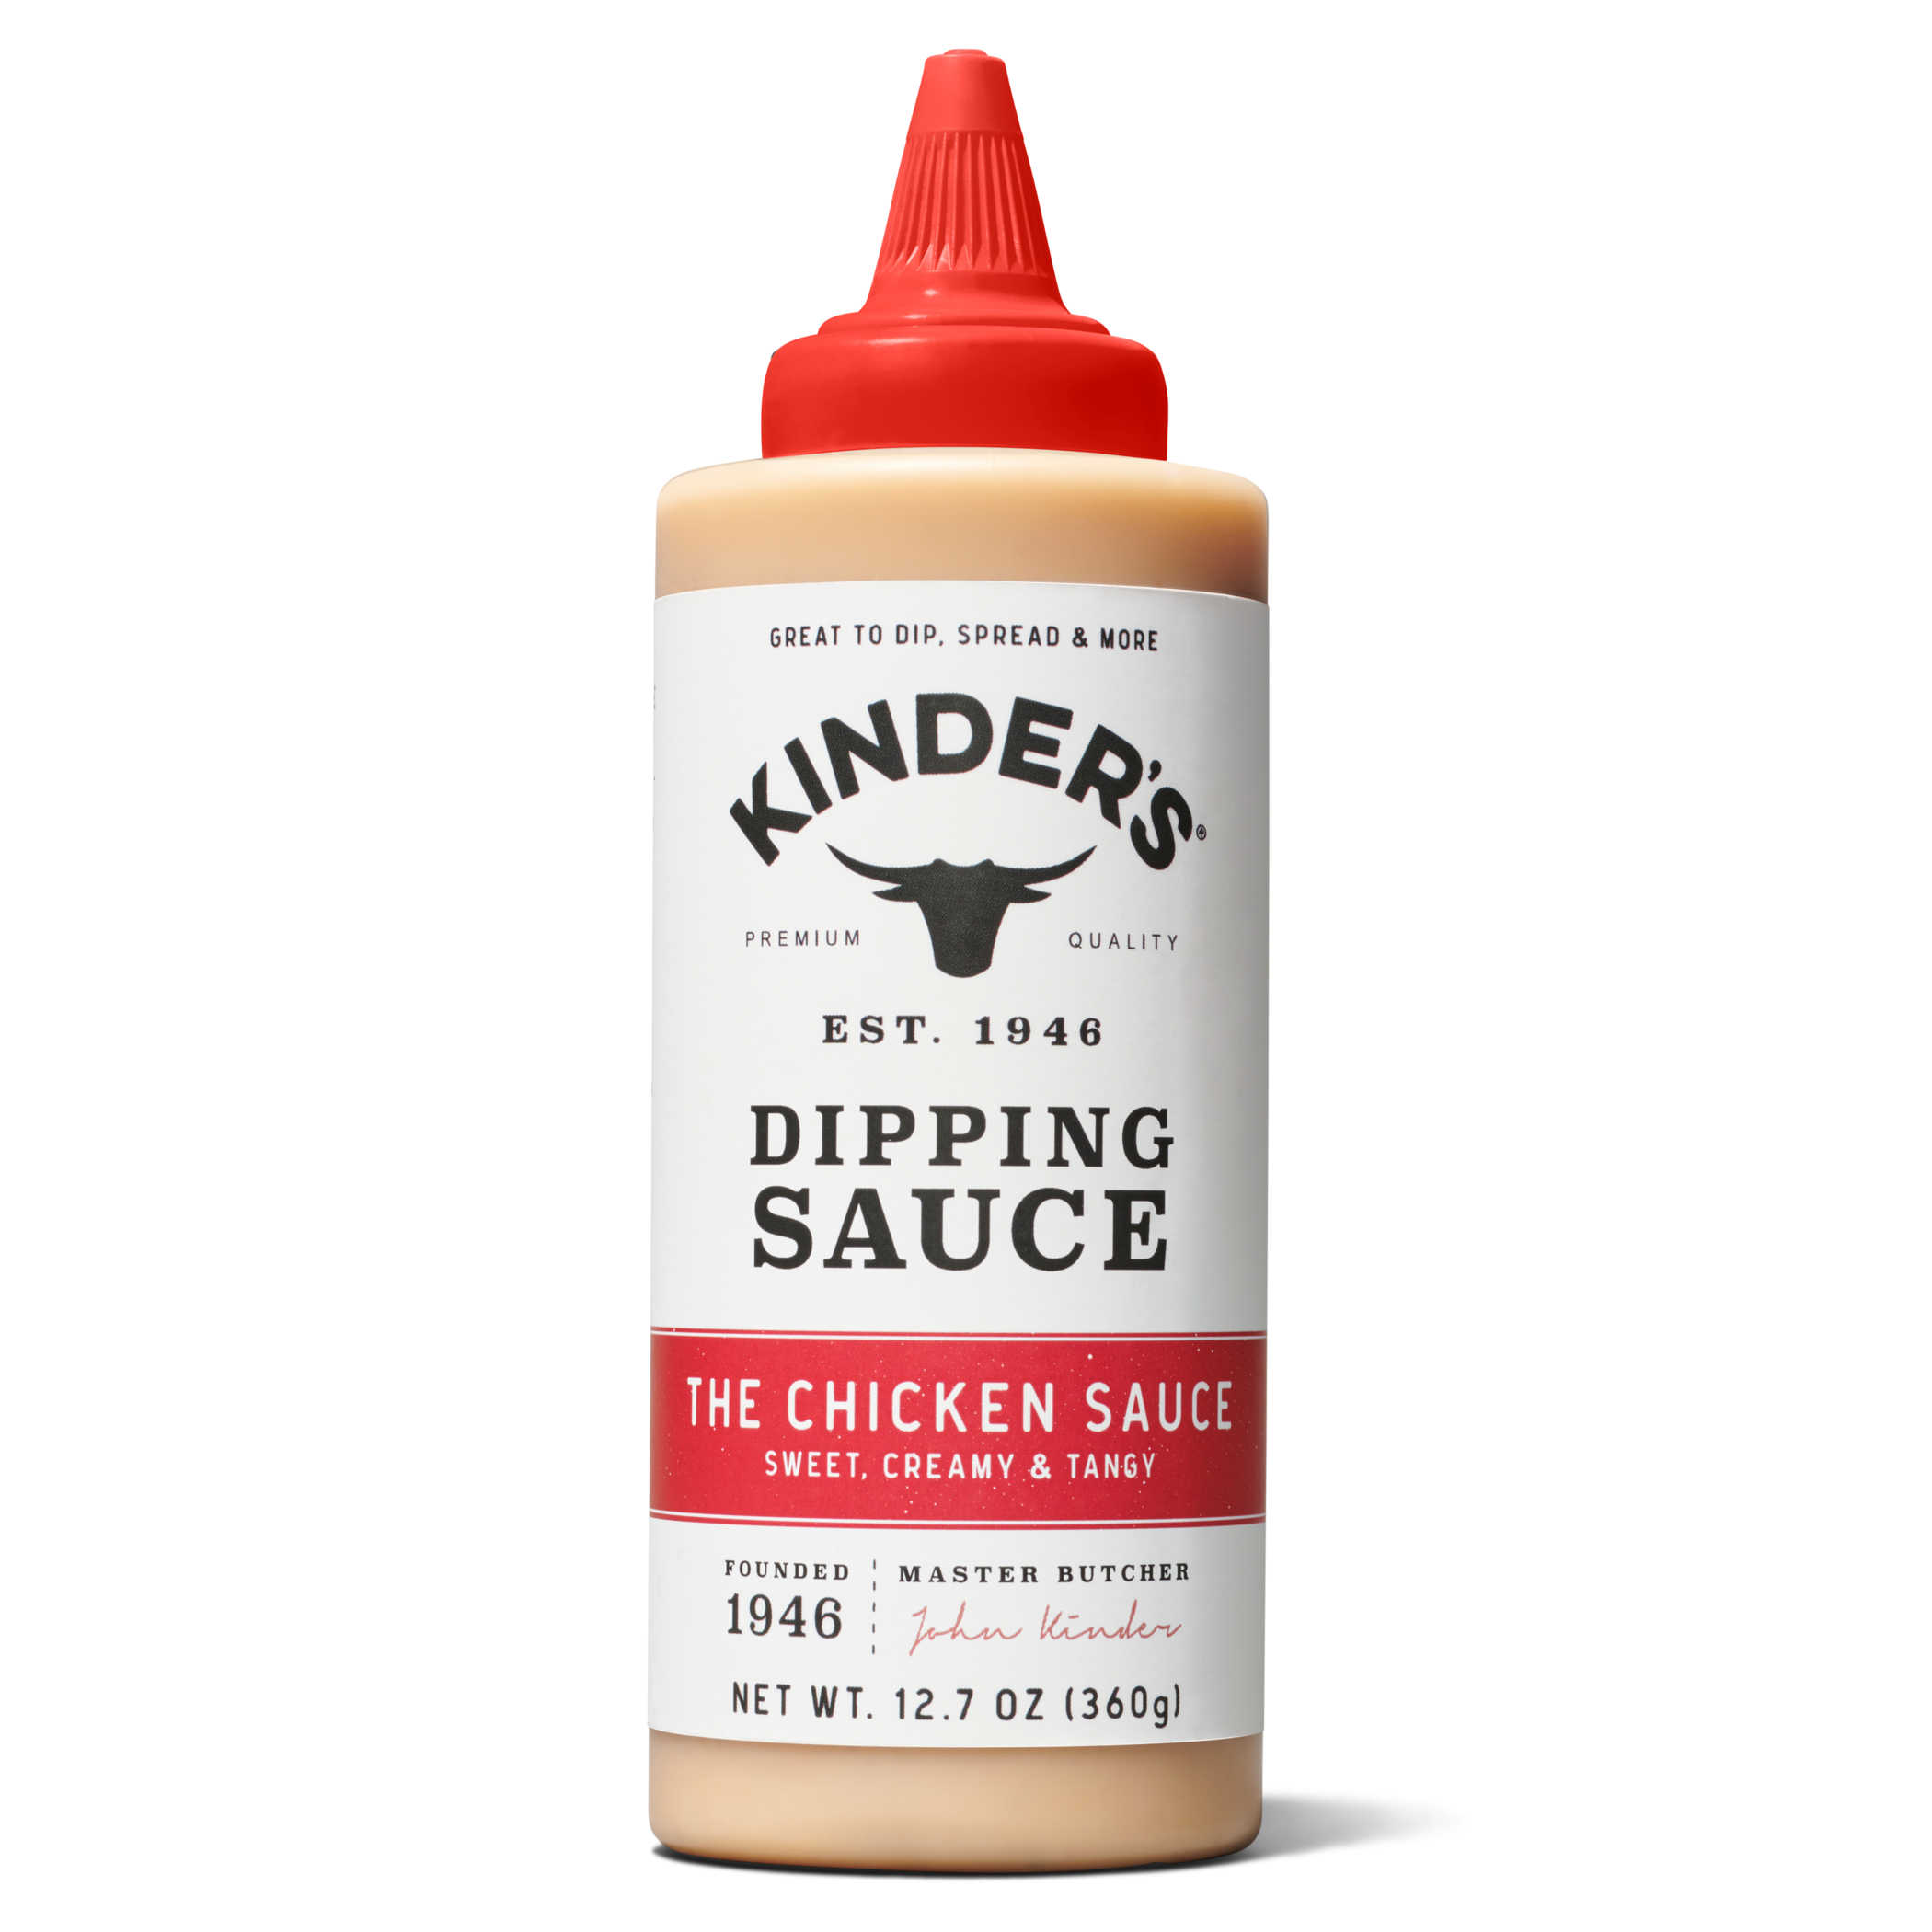 Kinders The Chicken Sauce Sweet Creamy & Tangy Dipping Sauce 12.7 oz - image 1 of 8